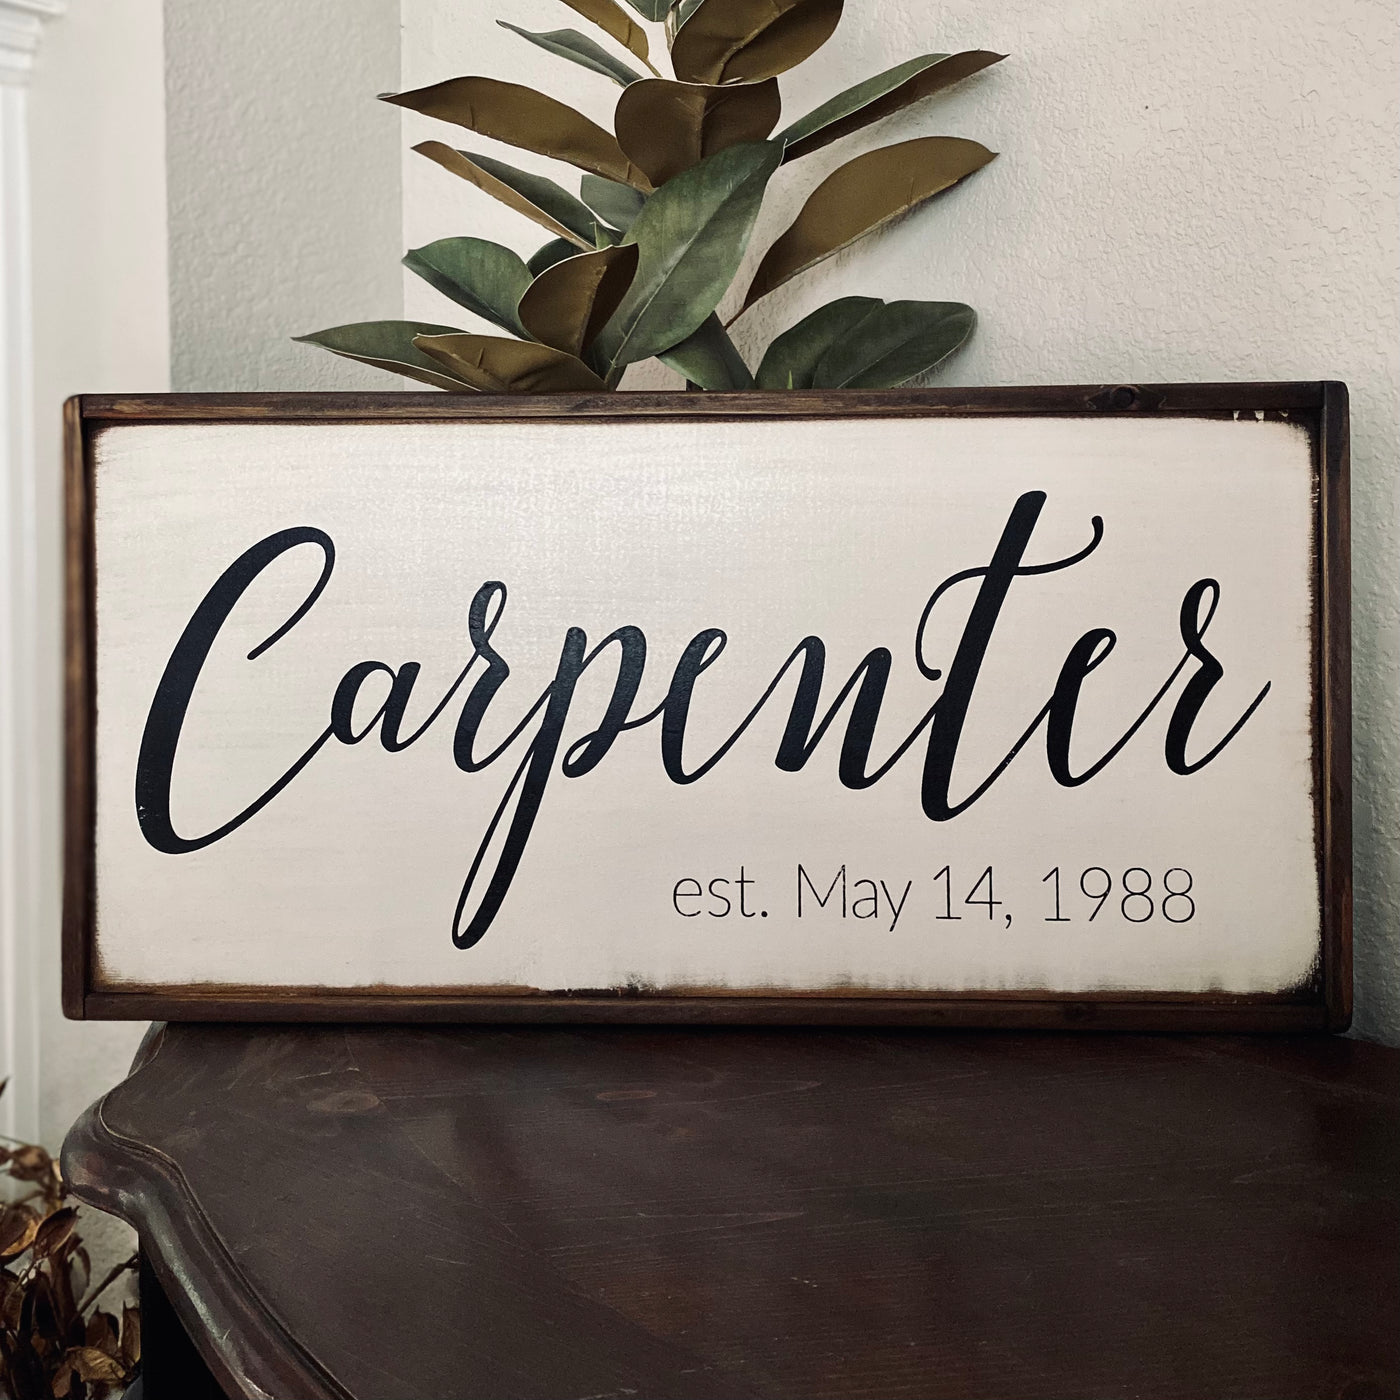 Handmade personalized wood sign reads family name Carpenter and established date “est. May 14, 1988”